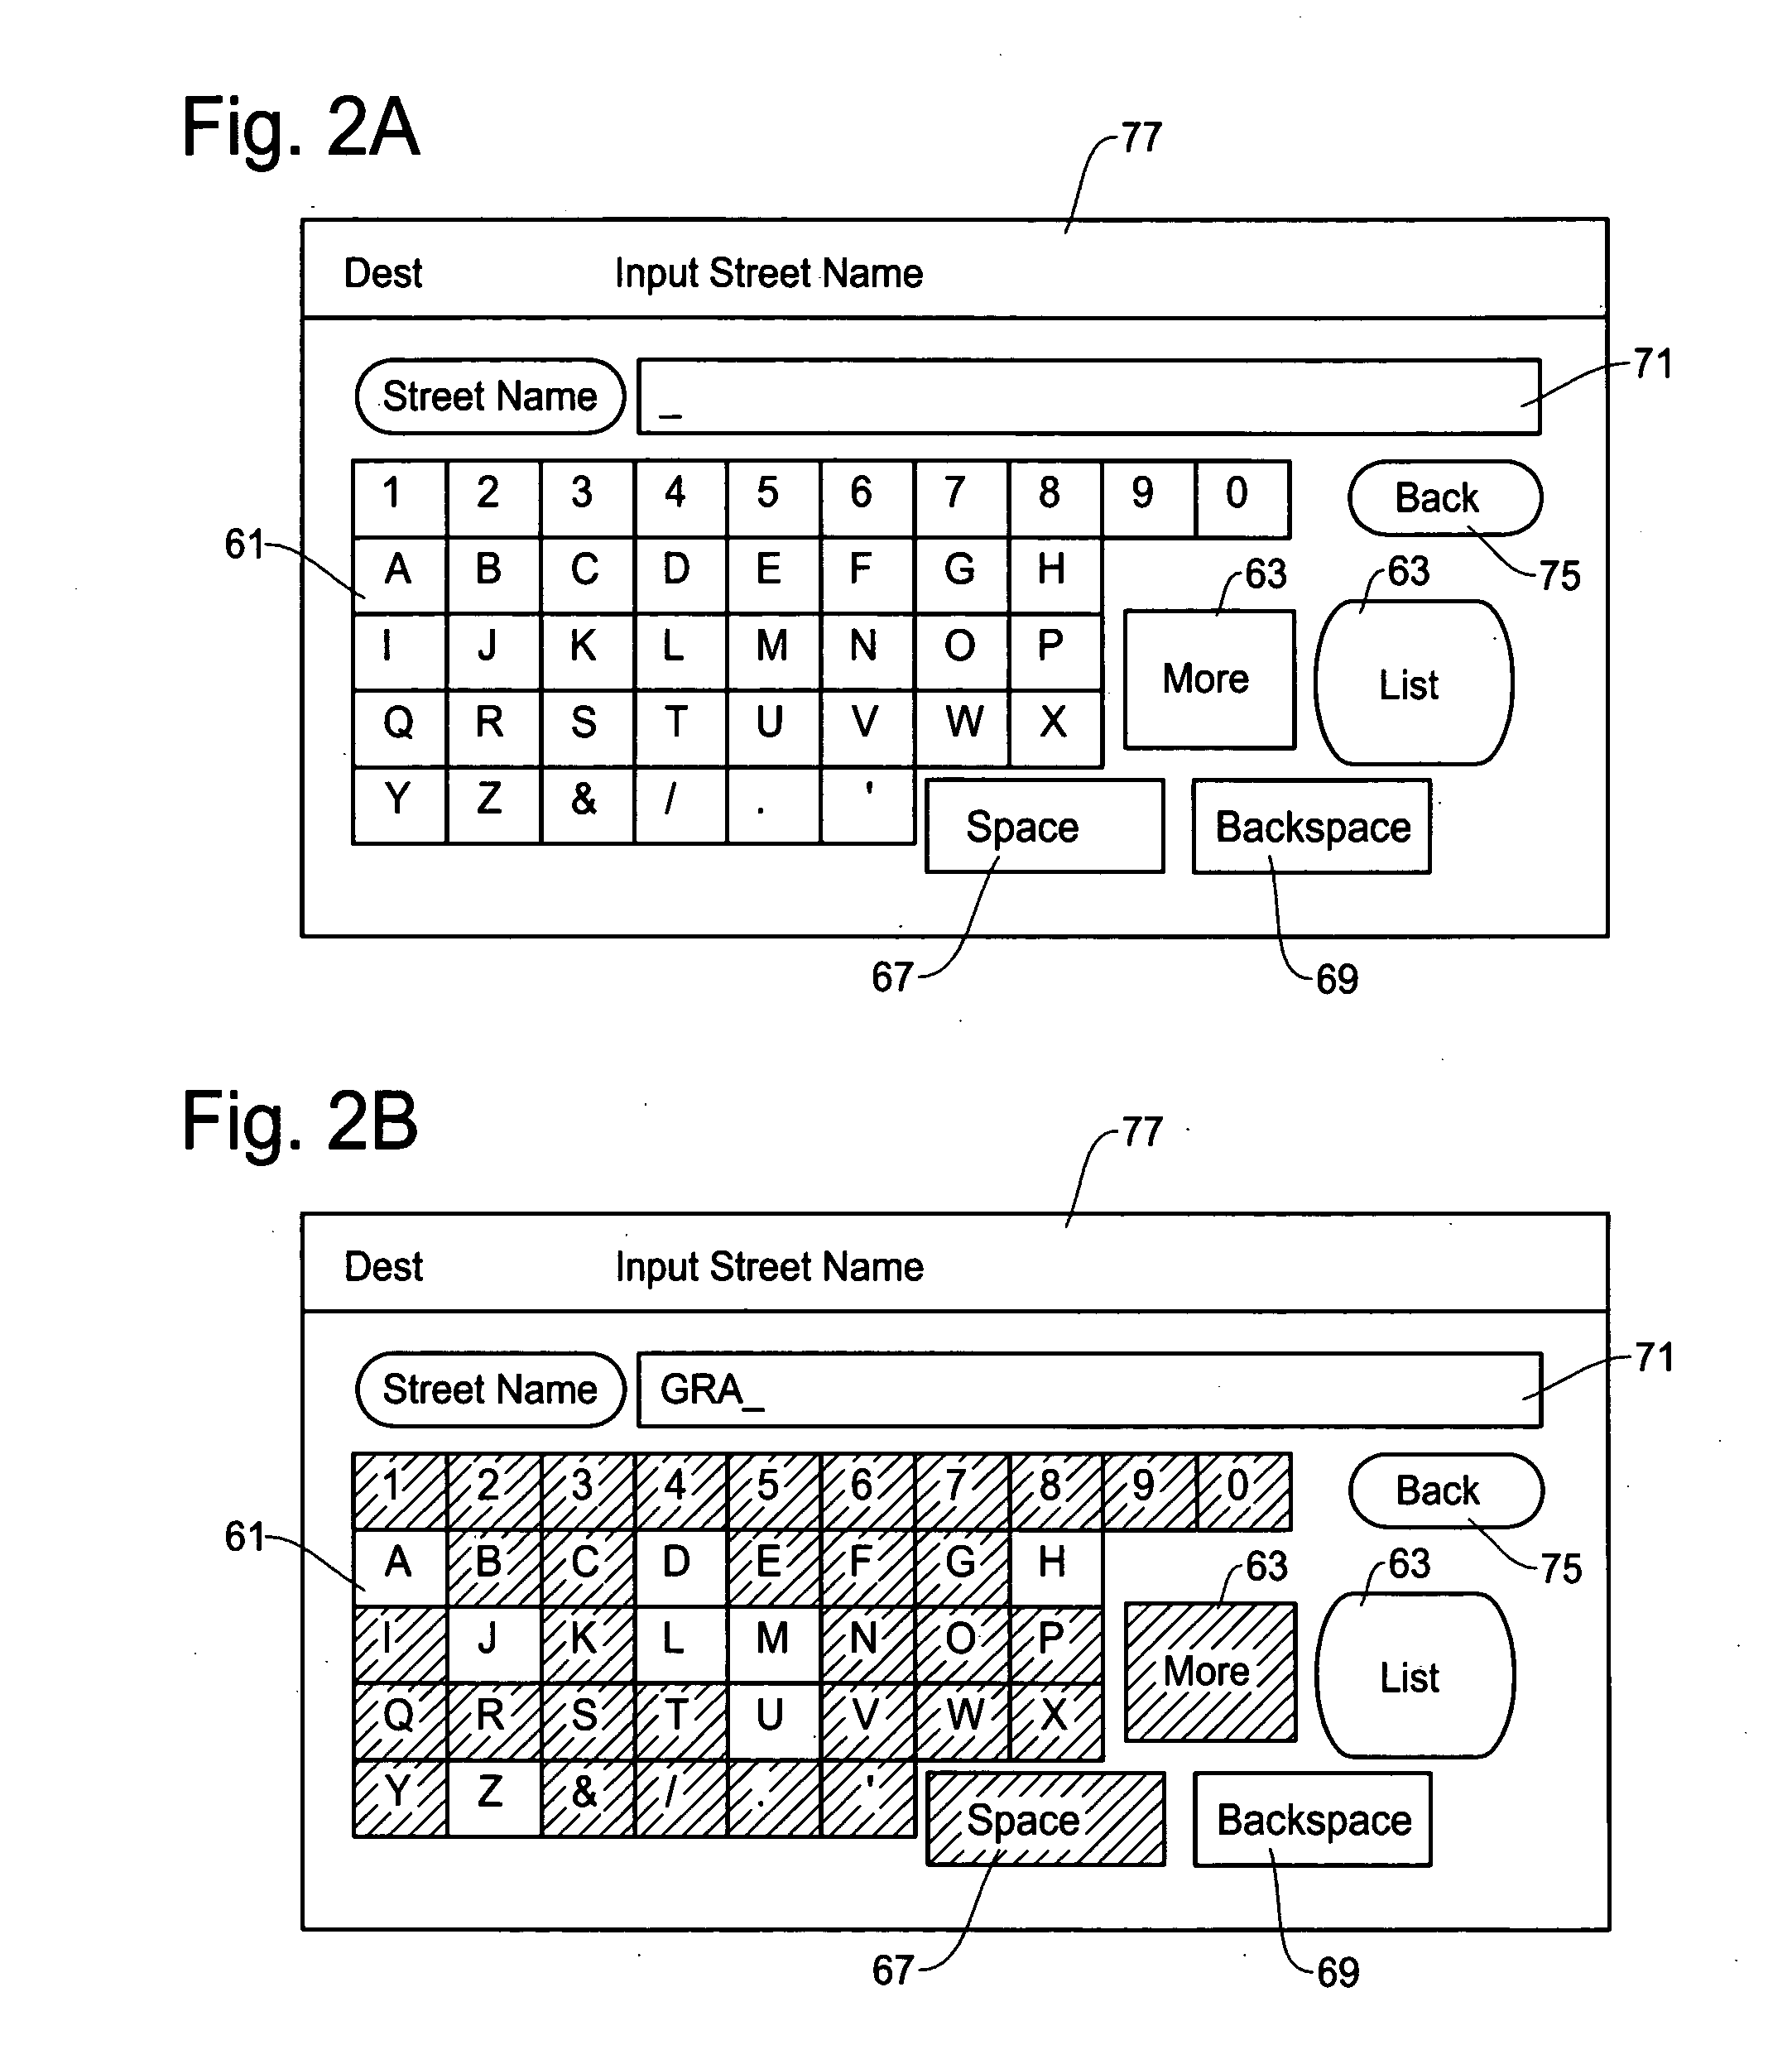 Method and apparatus for keyboard arrangement for efficient data entry for navigation system